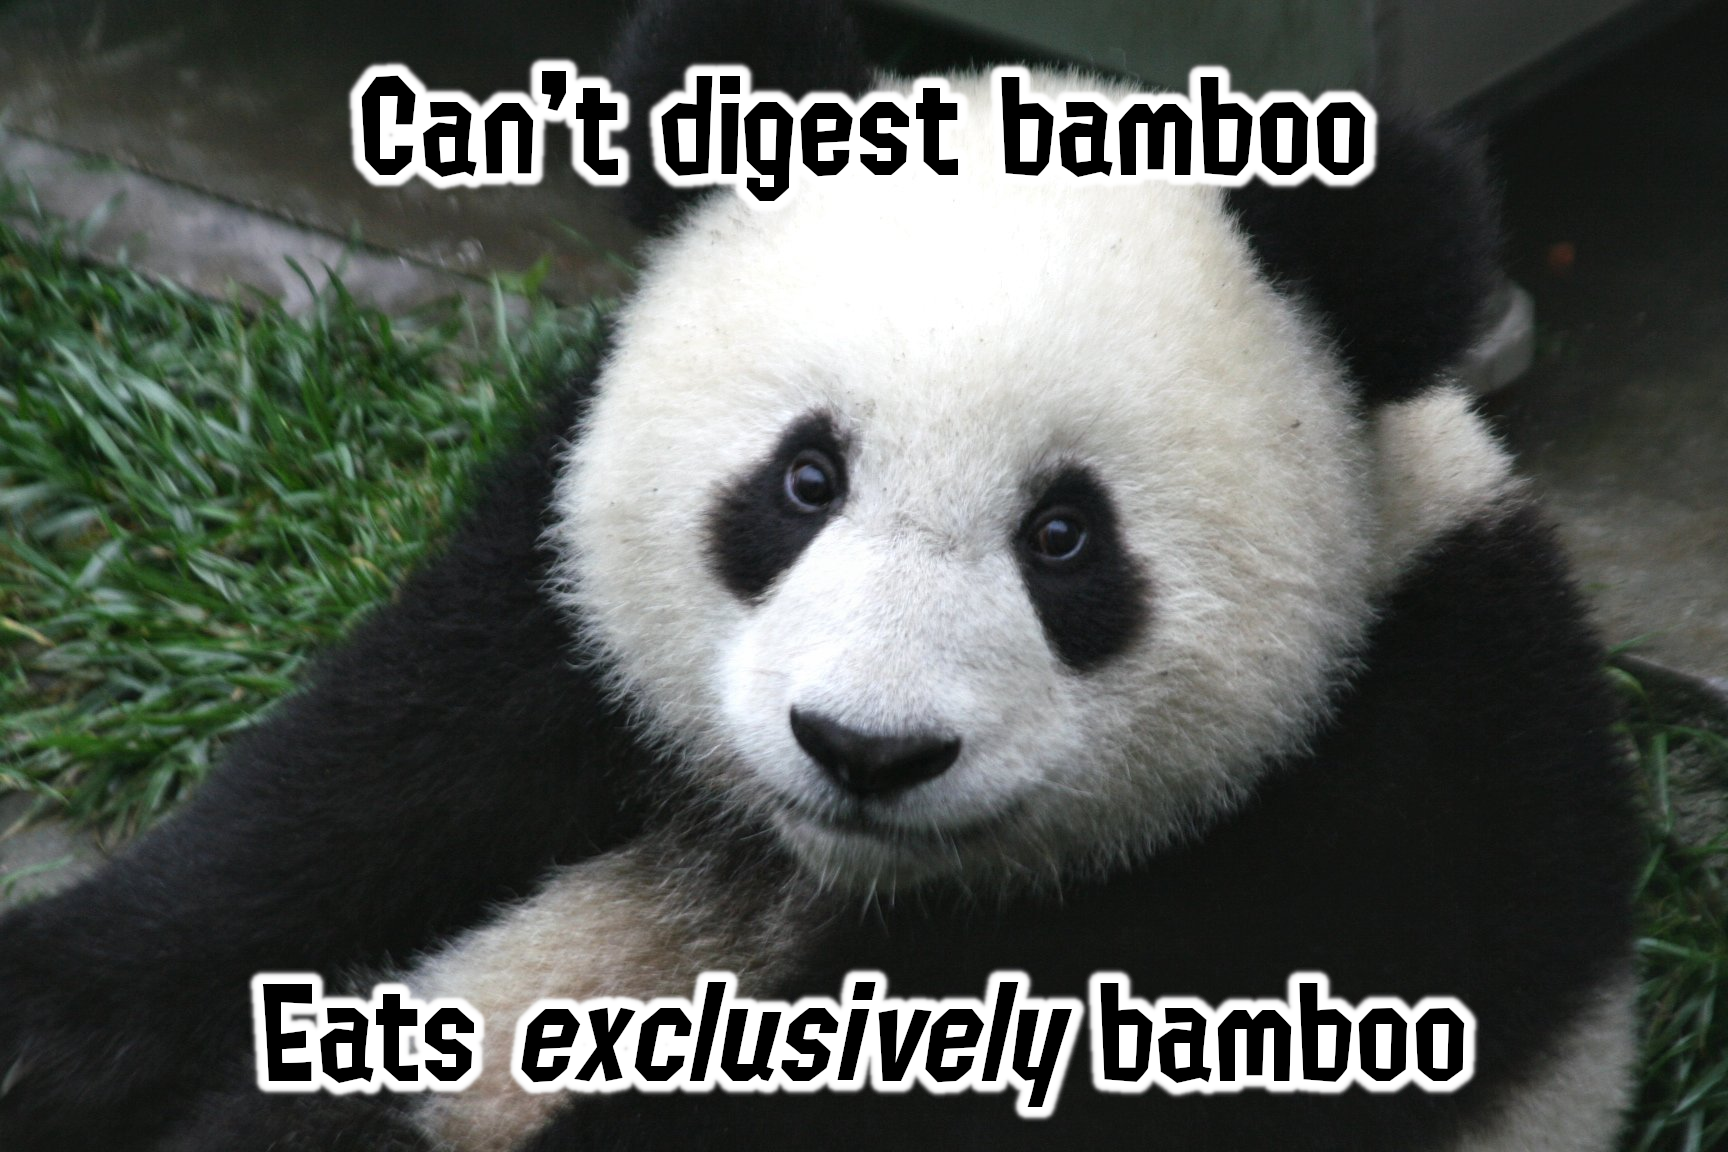 monday morning randomness - giant panda - Can't digest bamboo Eats exclusively bamboo